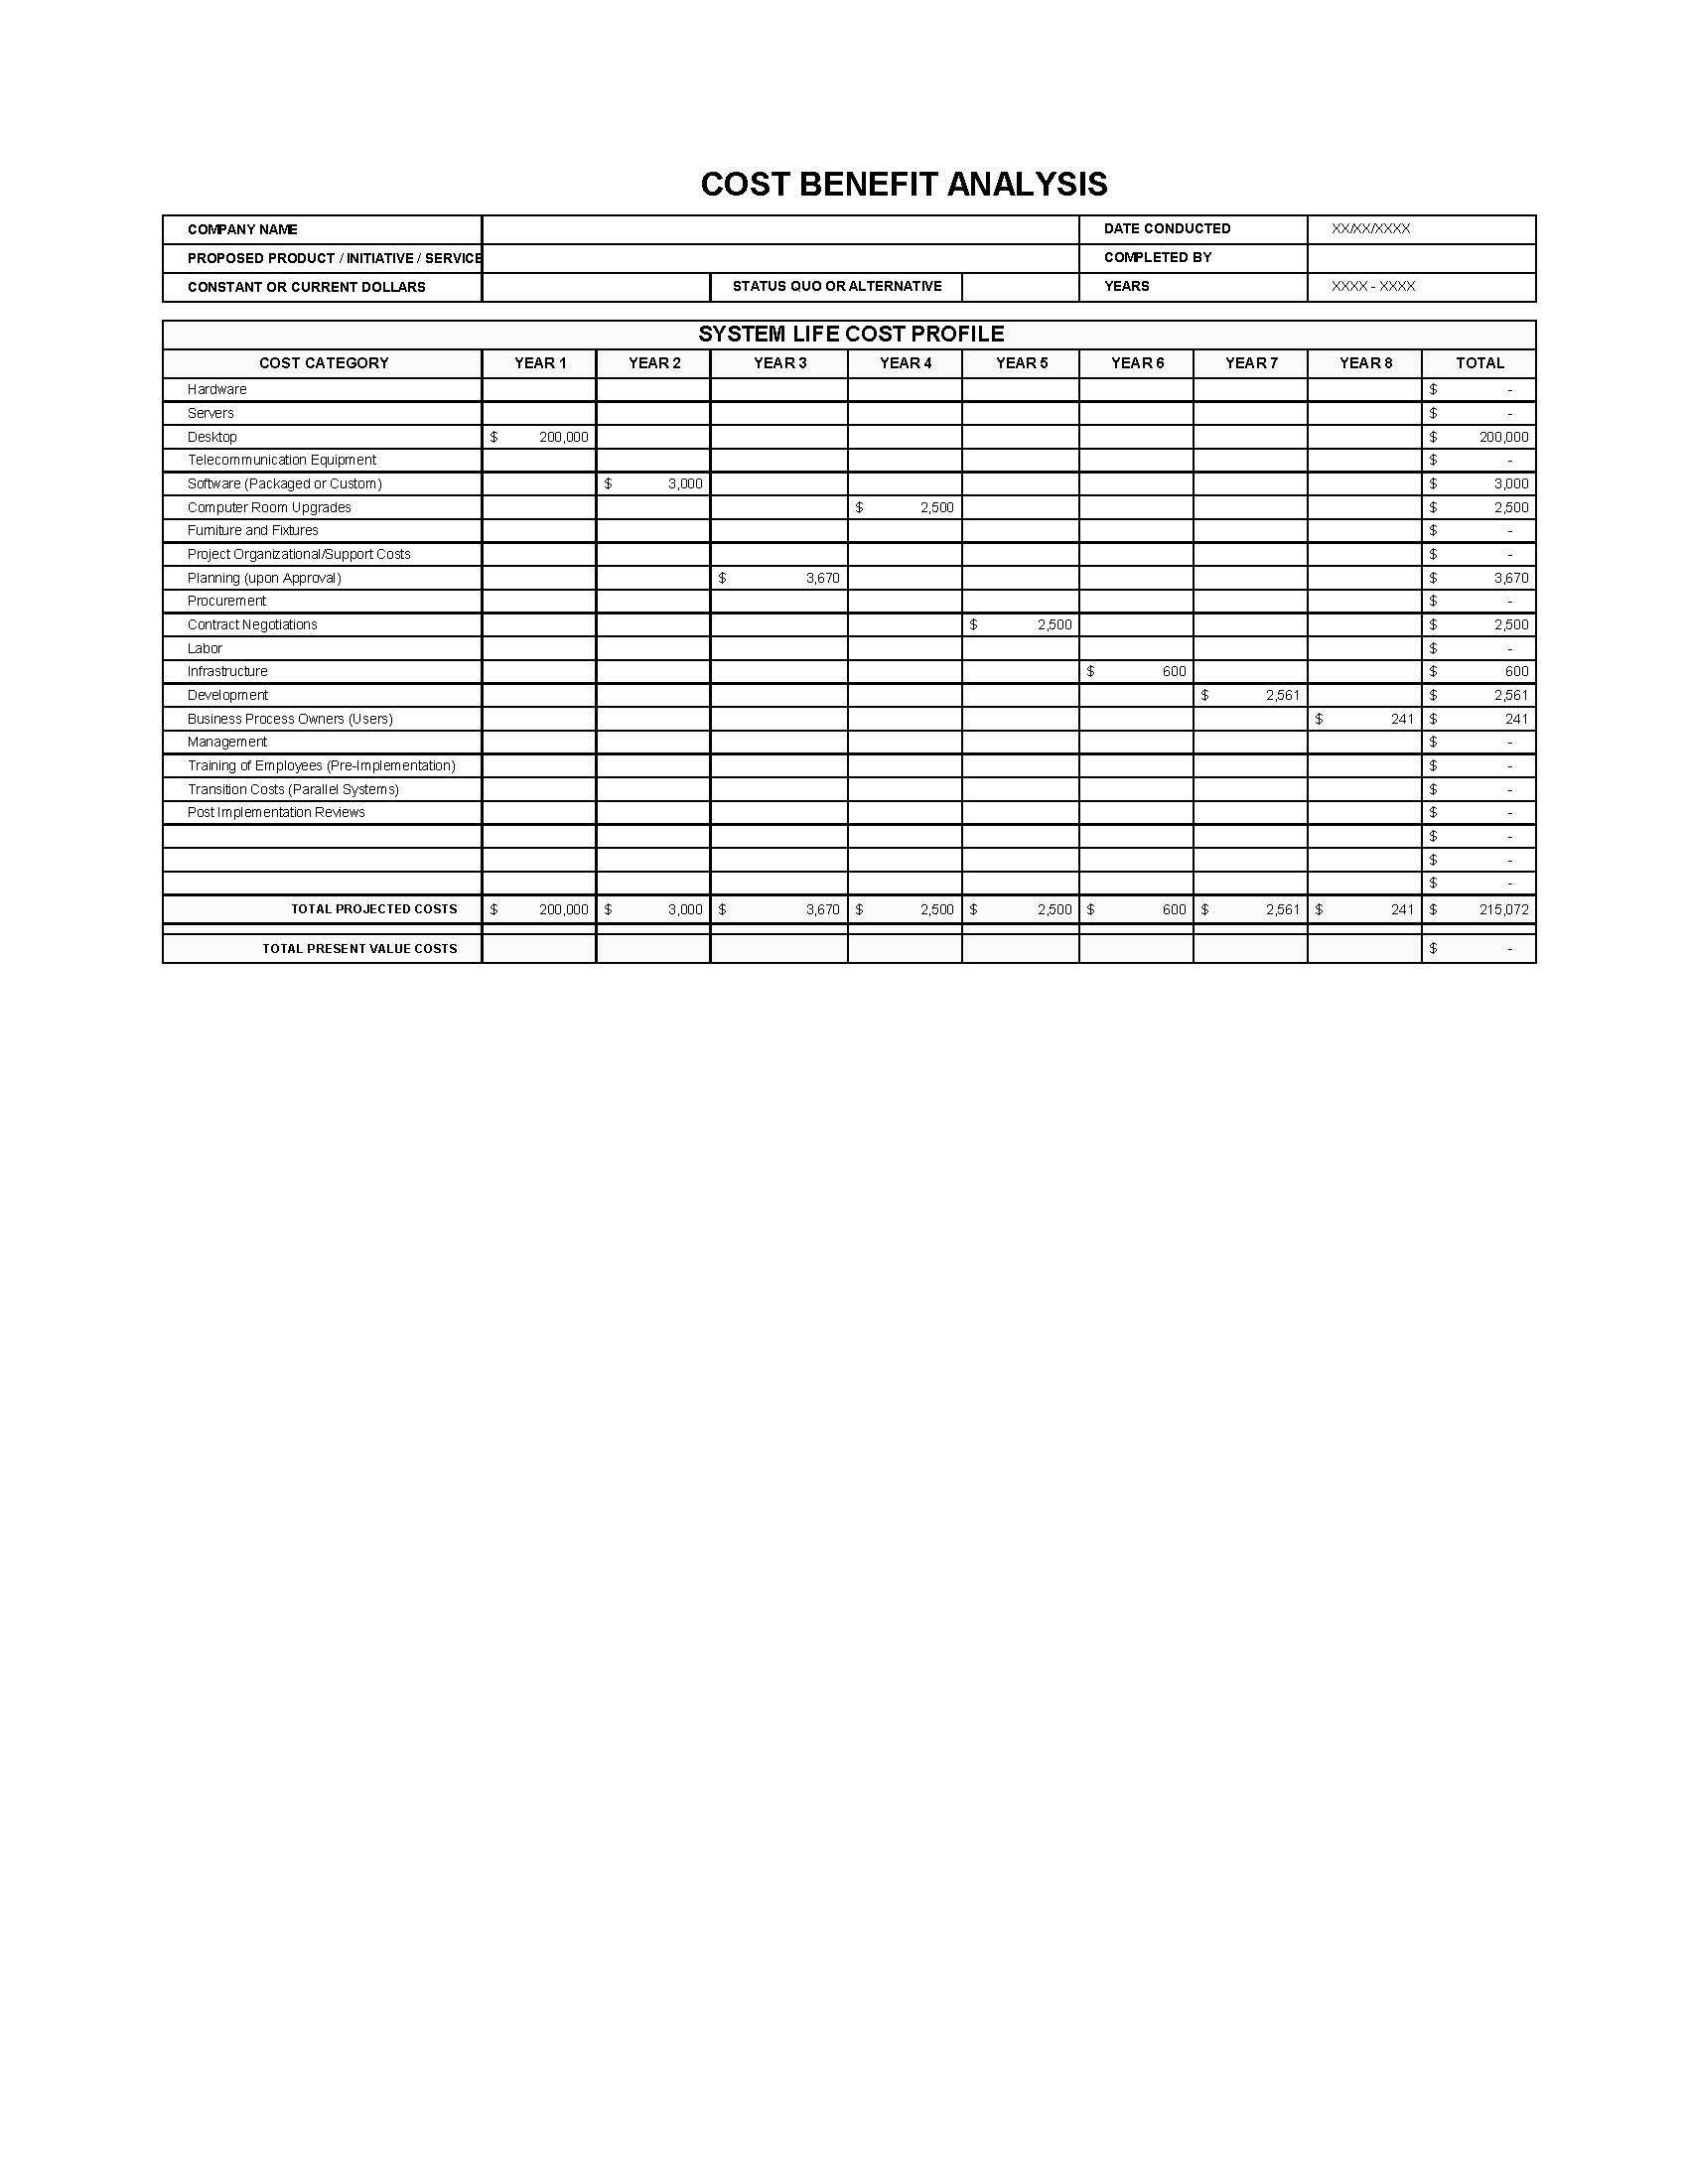 Excel Cost Benefit Analysis Template - Free Download 07